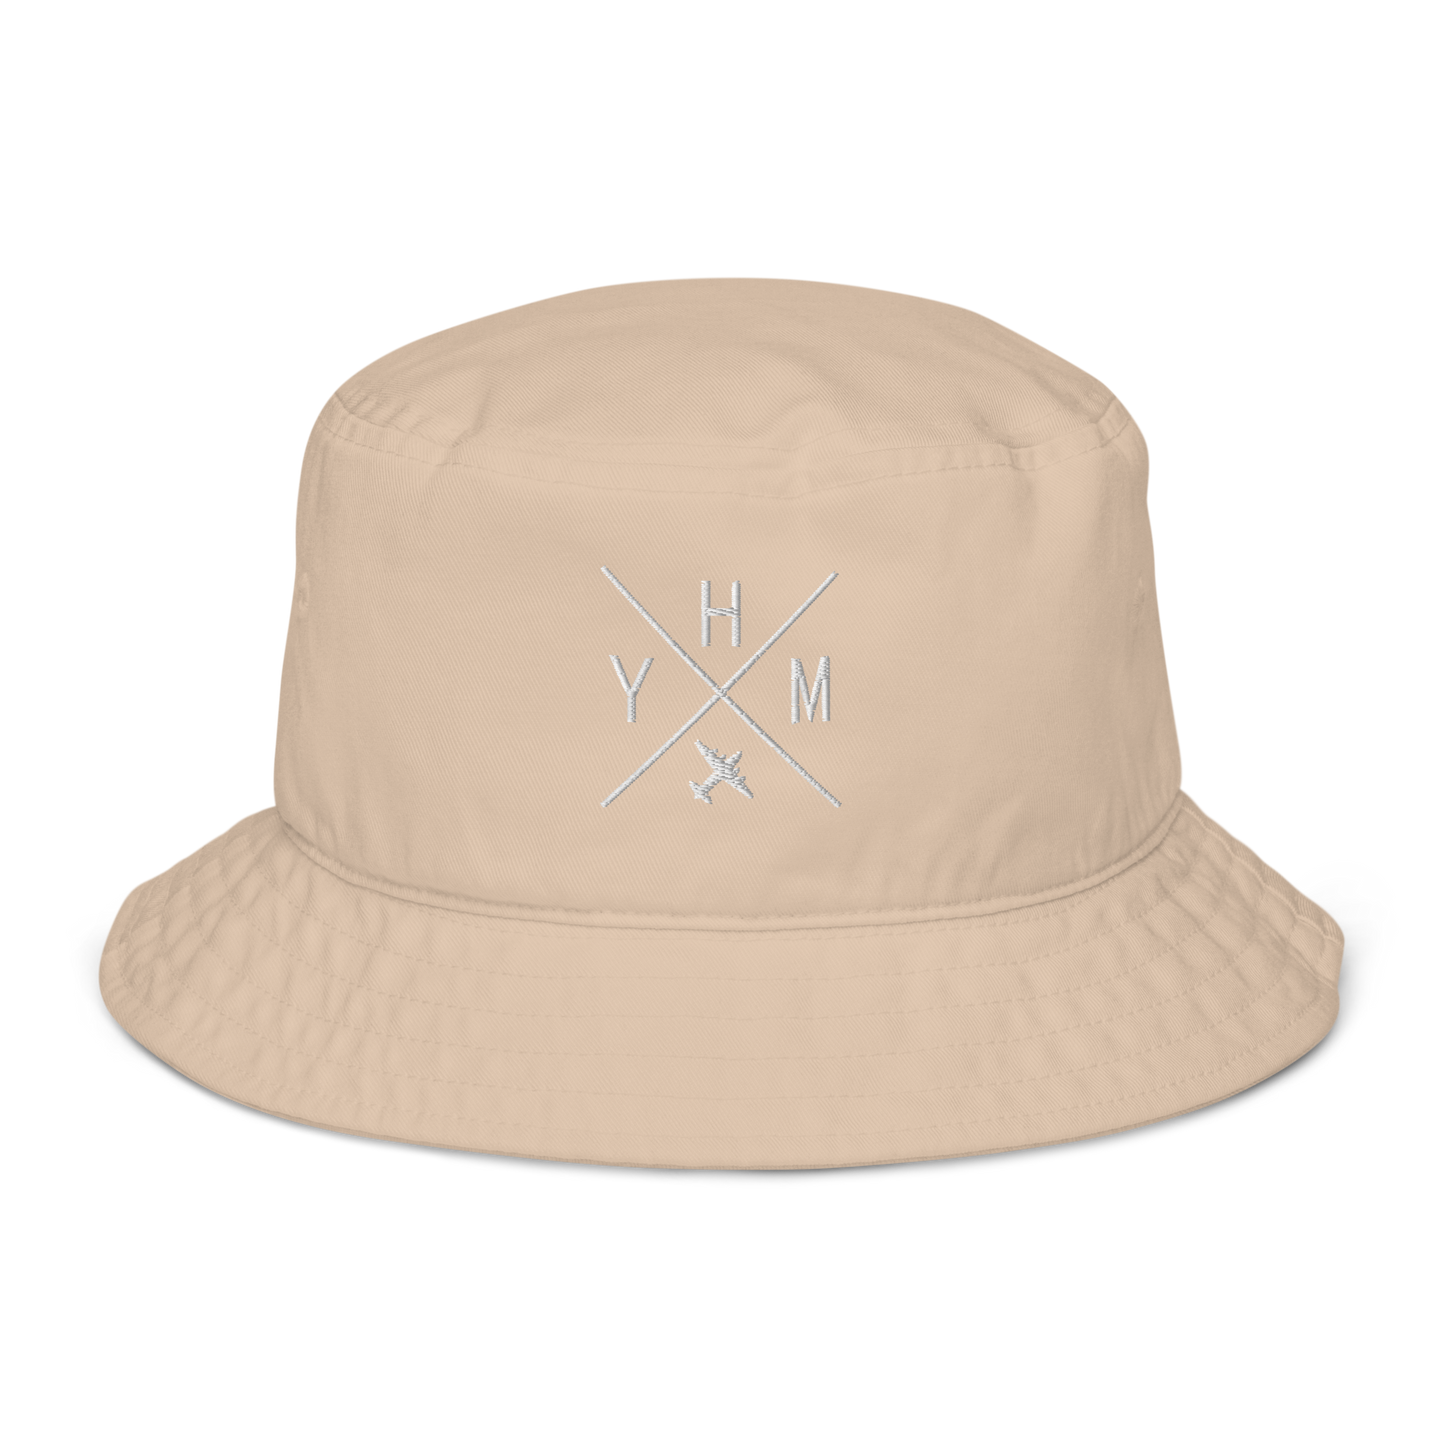 YHM Designs - YHM Hamilton Organic Cotton Bucket Hat - Crossed-X Design with Airport Code and Vintage Propliner - White Embroidery - Image 08